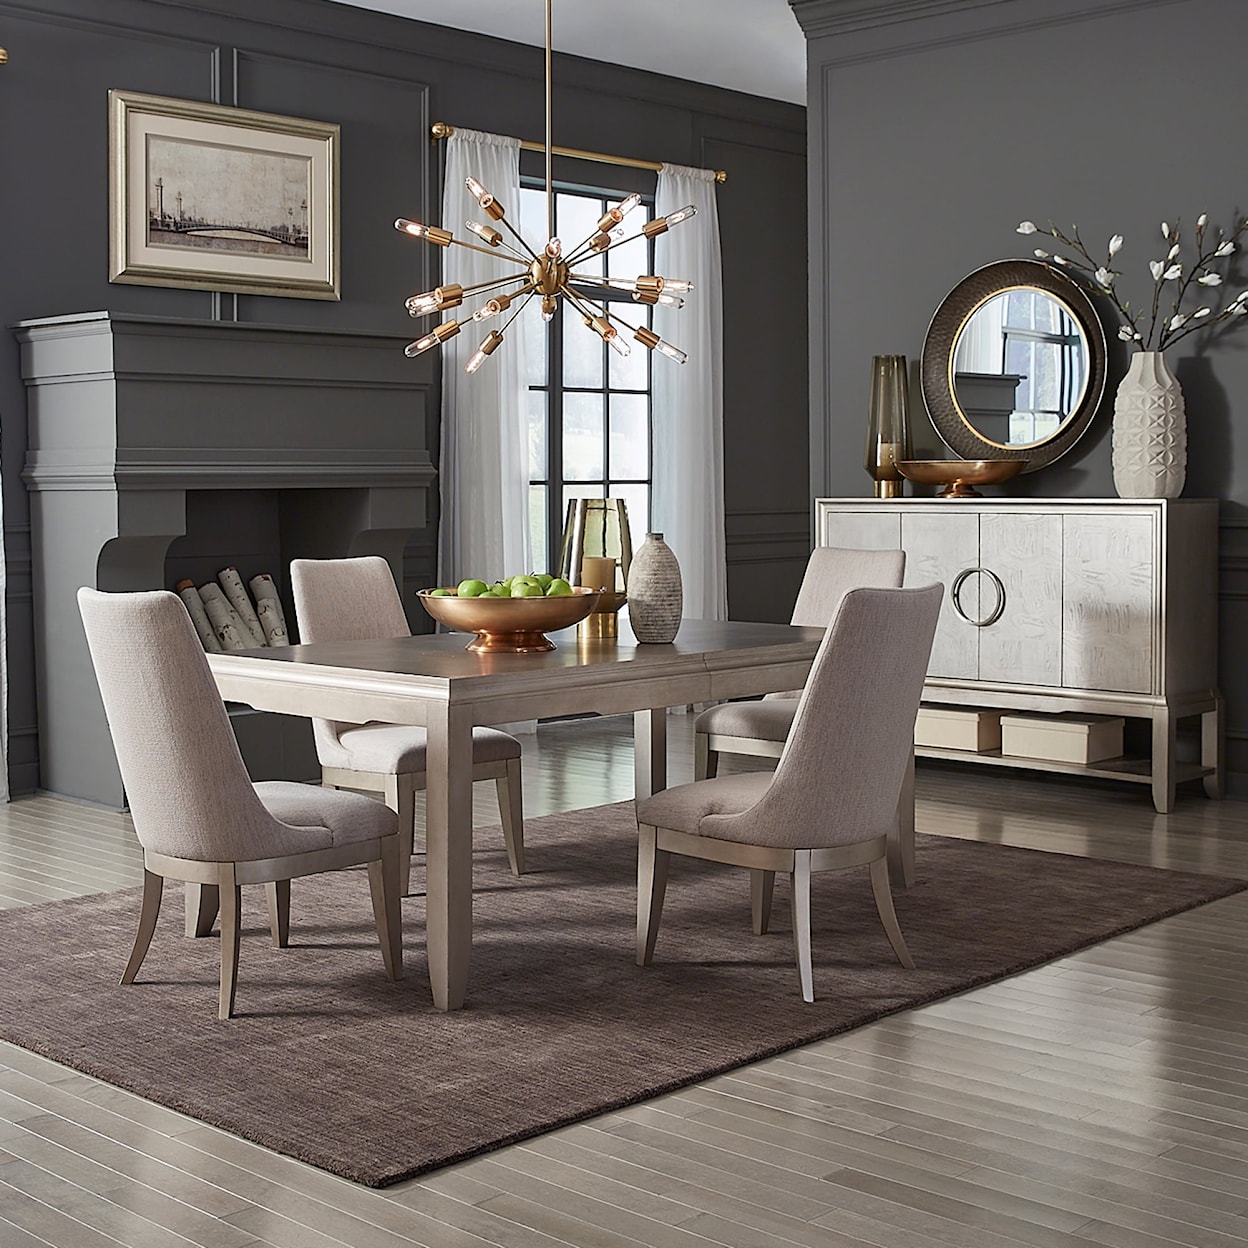 Libby Montage 6-Piece Dining Set